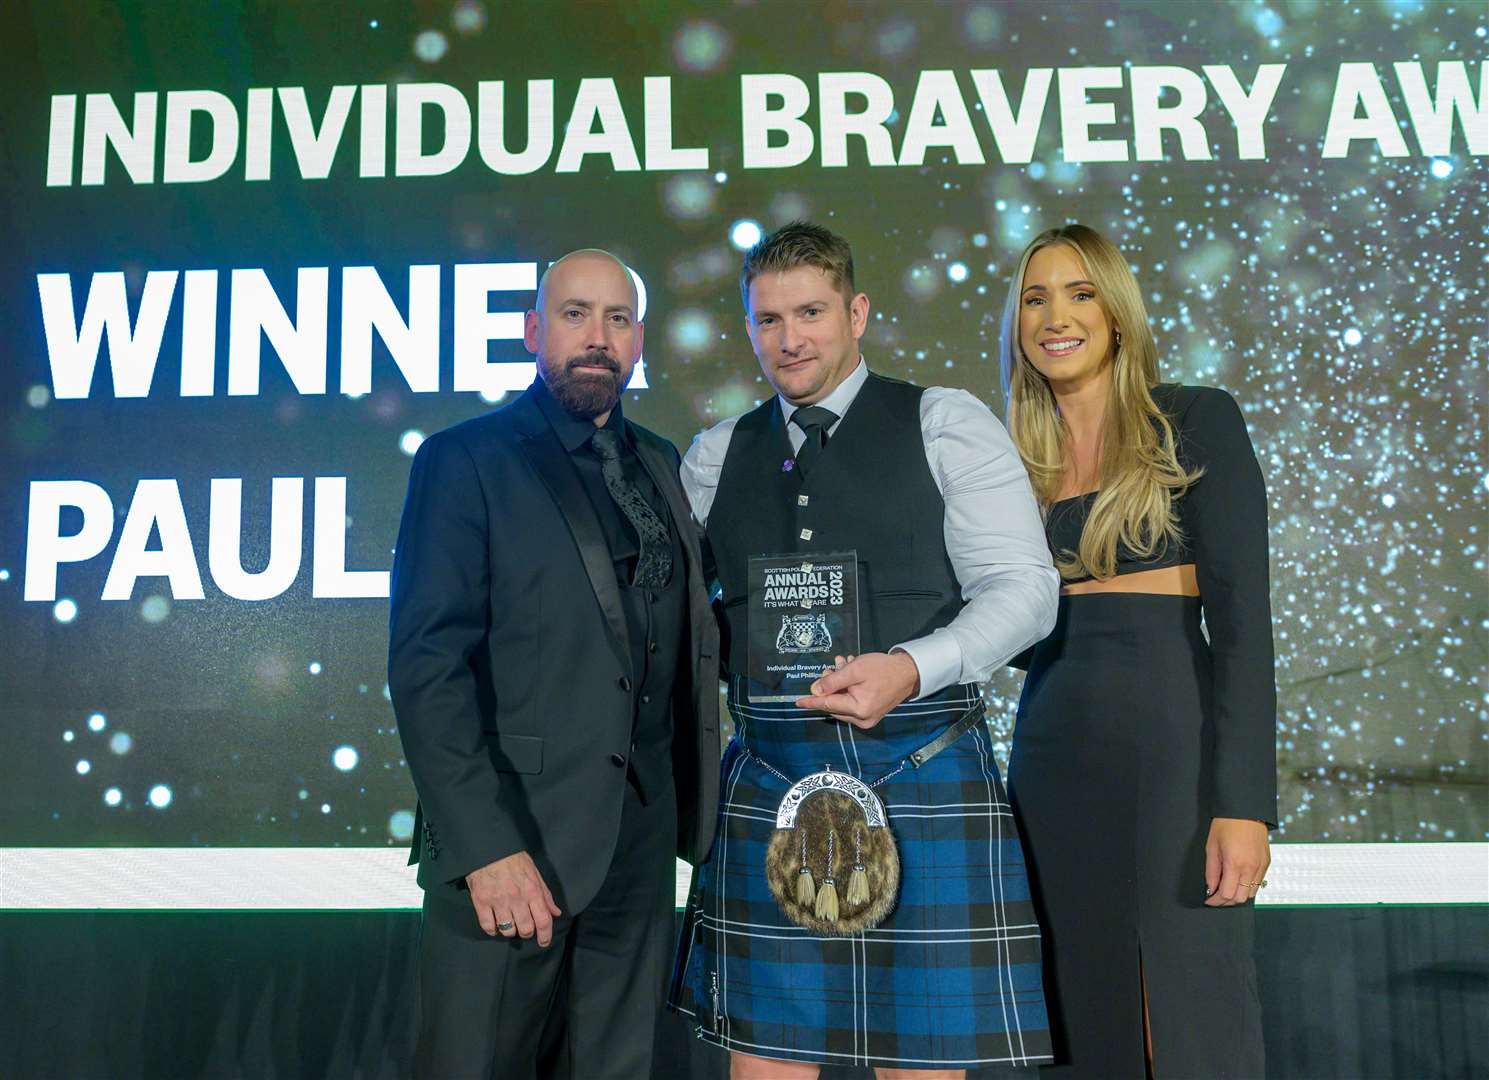 Paul Phillips (centre) is receives the Individual Bravery Award from David Kennedy, general secretary of the Scottish Police Federation, and event host Amy Irons. Picture: Sandy Young/scottishphotographer.com.